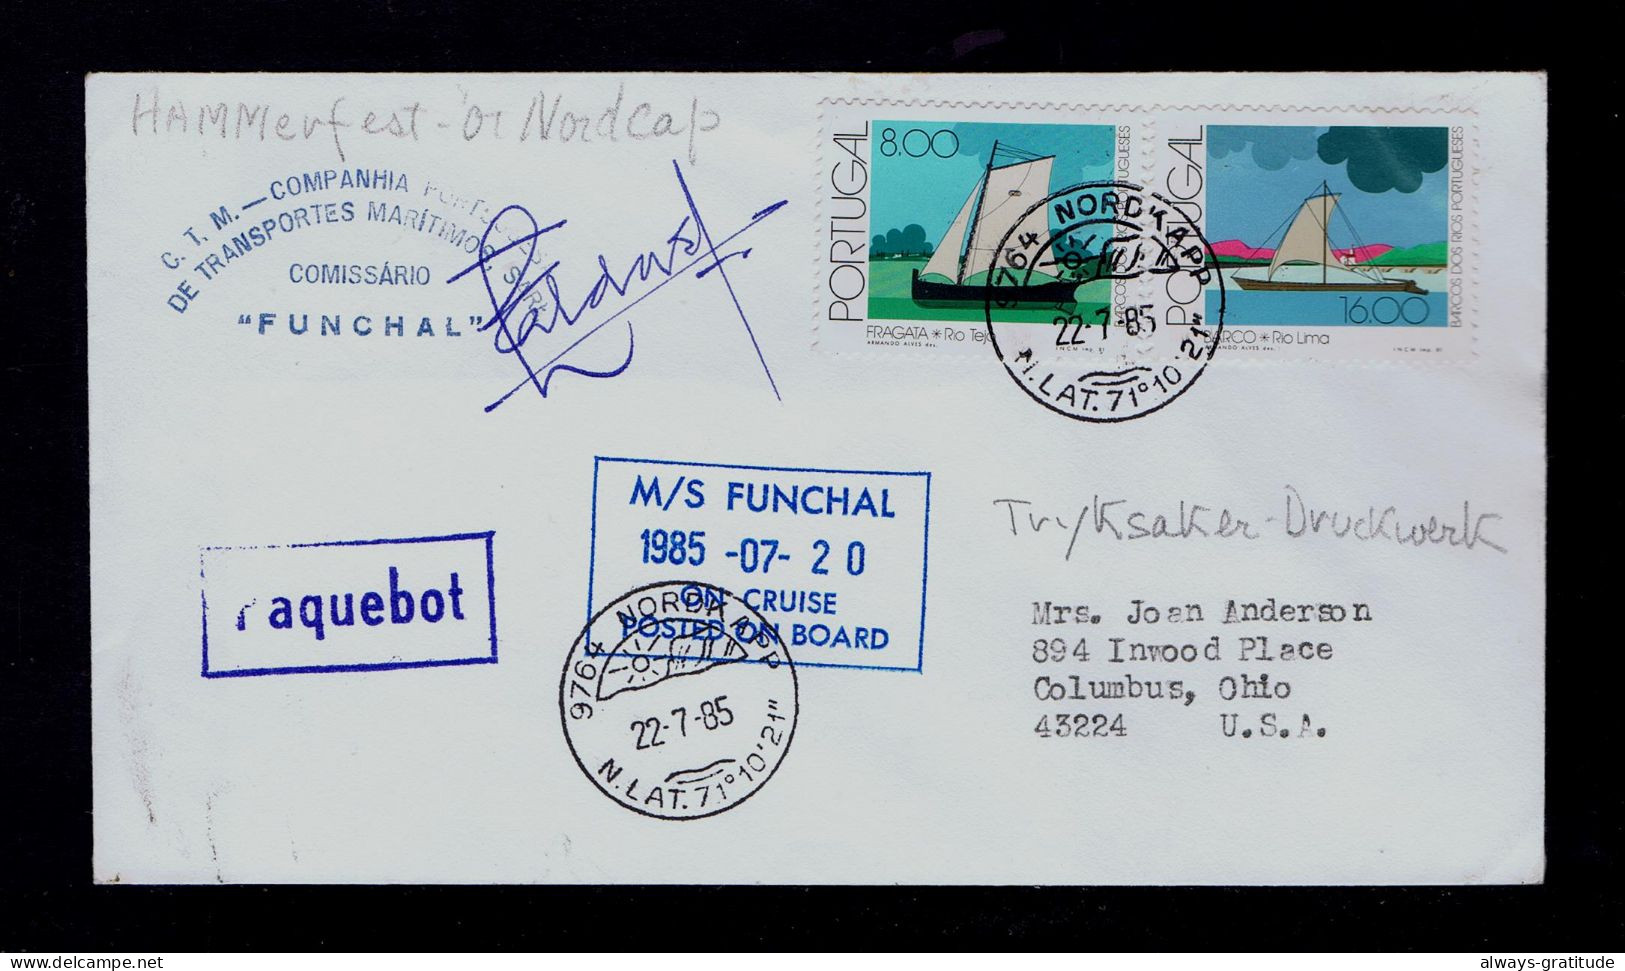 Sp10539 MADEIRA Island (FUNCHAL 1985 Posted On Board /cruise) Paquebot Portugal Mailed Ohio -US - Autres (Mer)